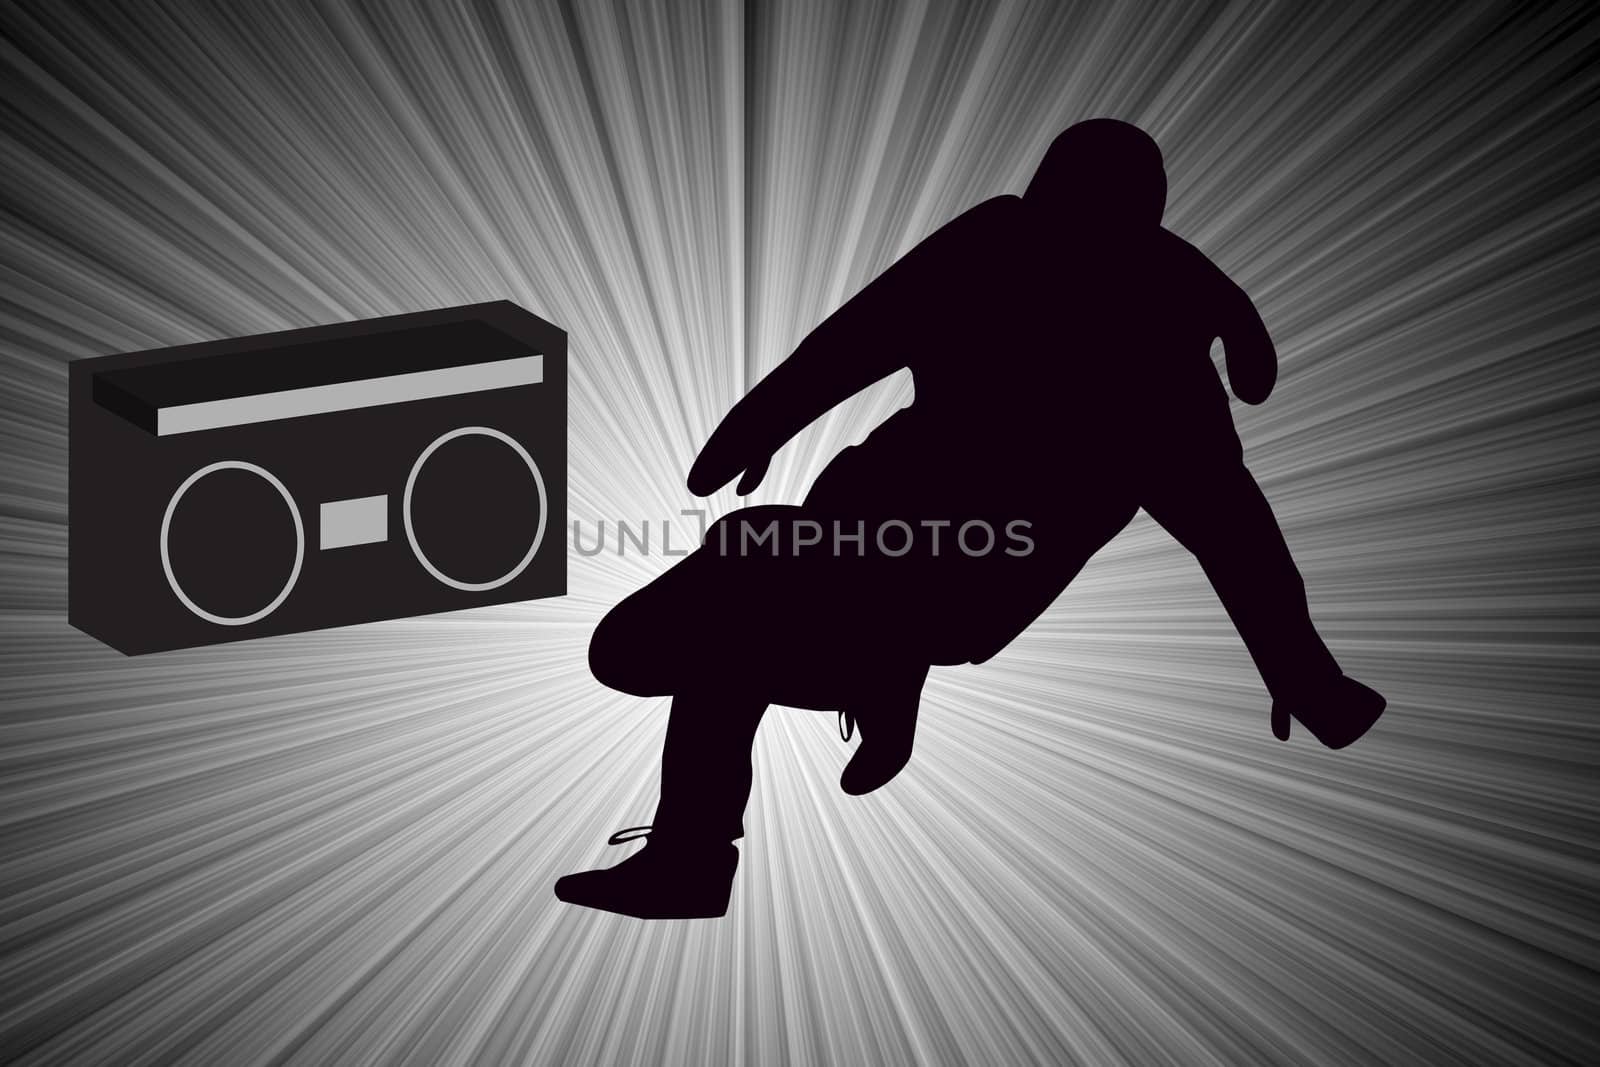 Breakdancer Dancing with Old School Boom Box Silhouette illustration.  